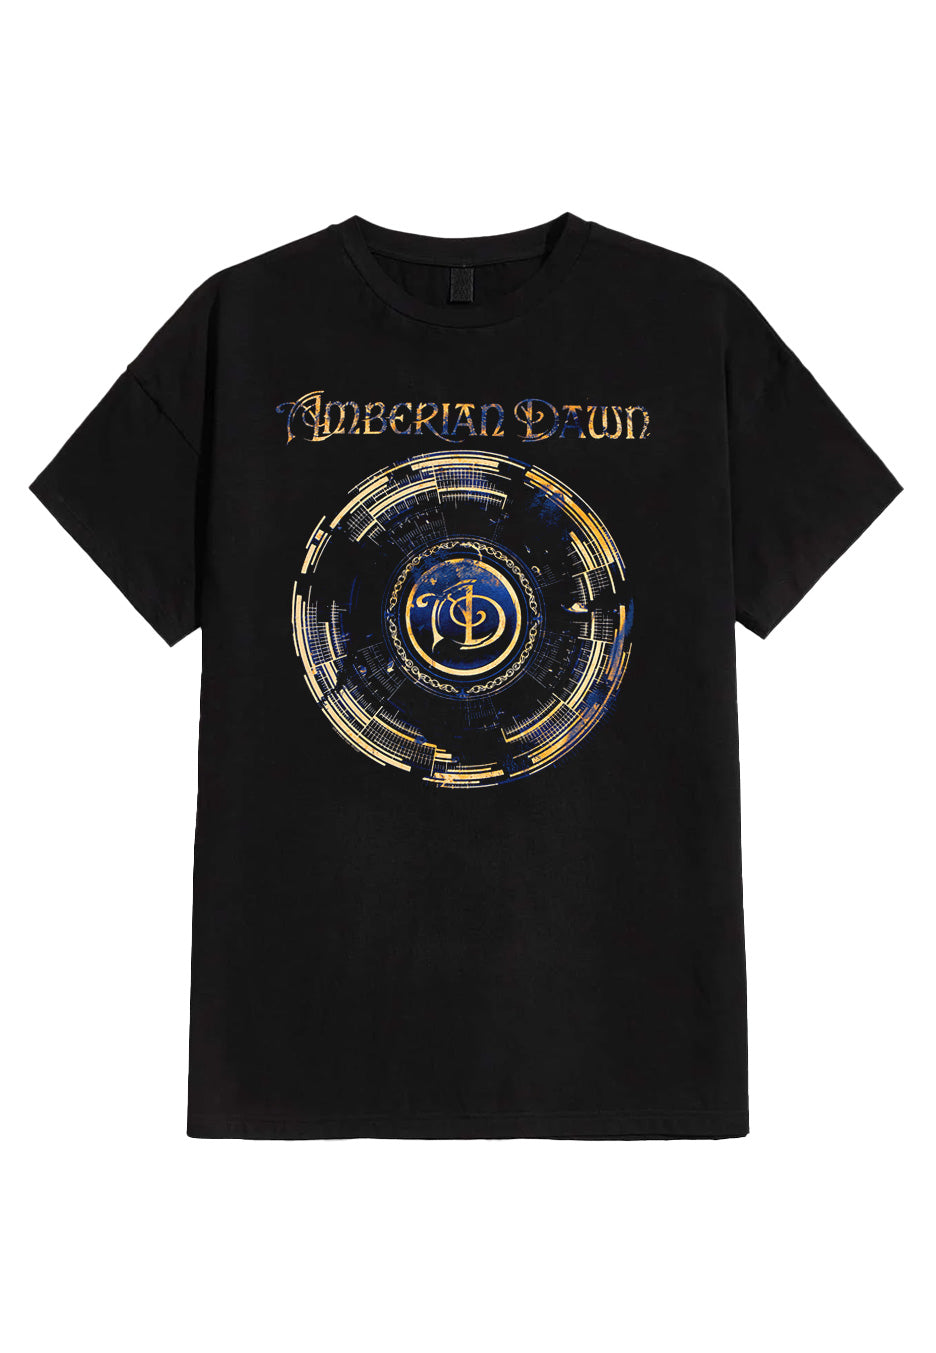 Amberian Dawn - Looking For You - T-Shirt